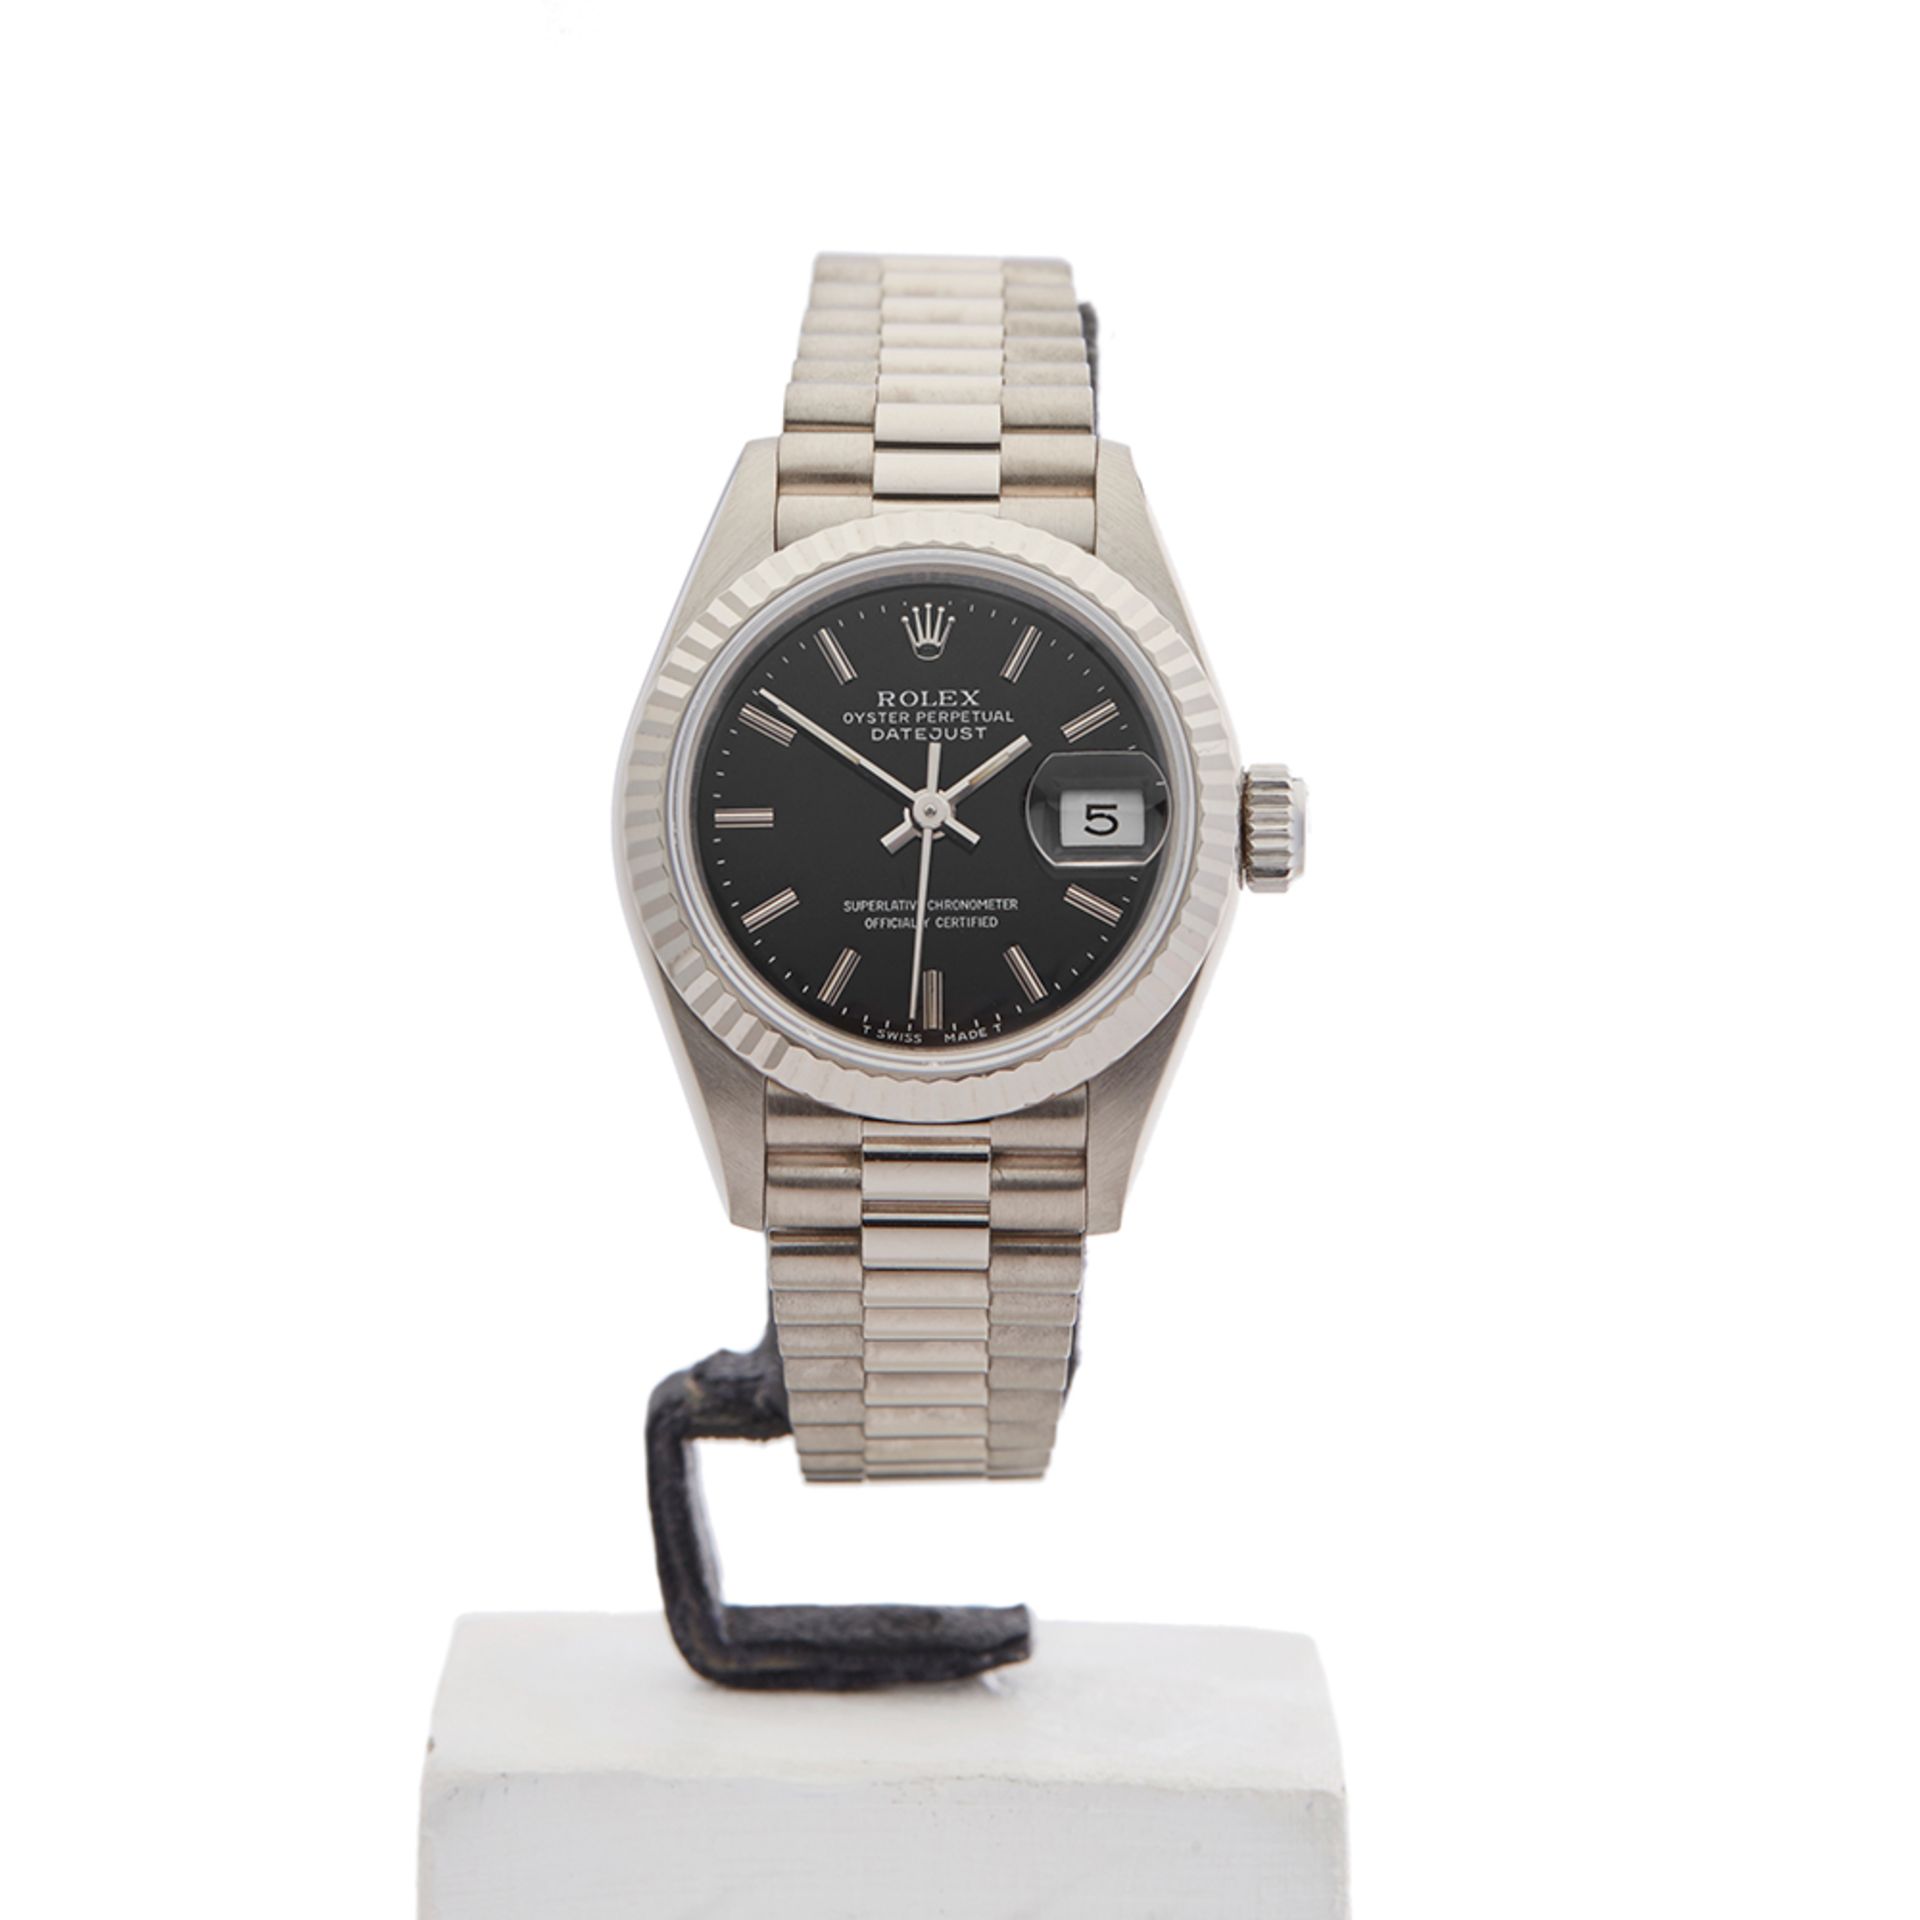 Rolex Datejust 26mm 18k White Gold 69179 - Image 2 of 9